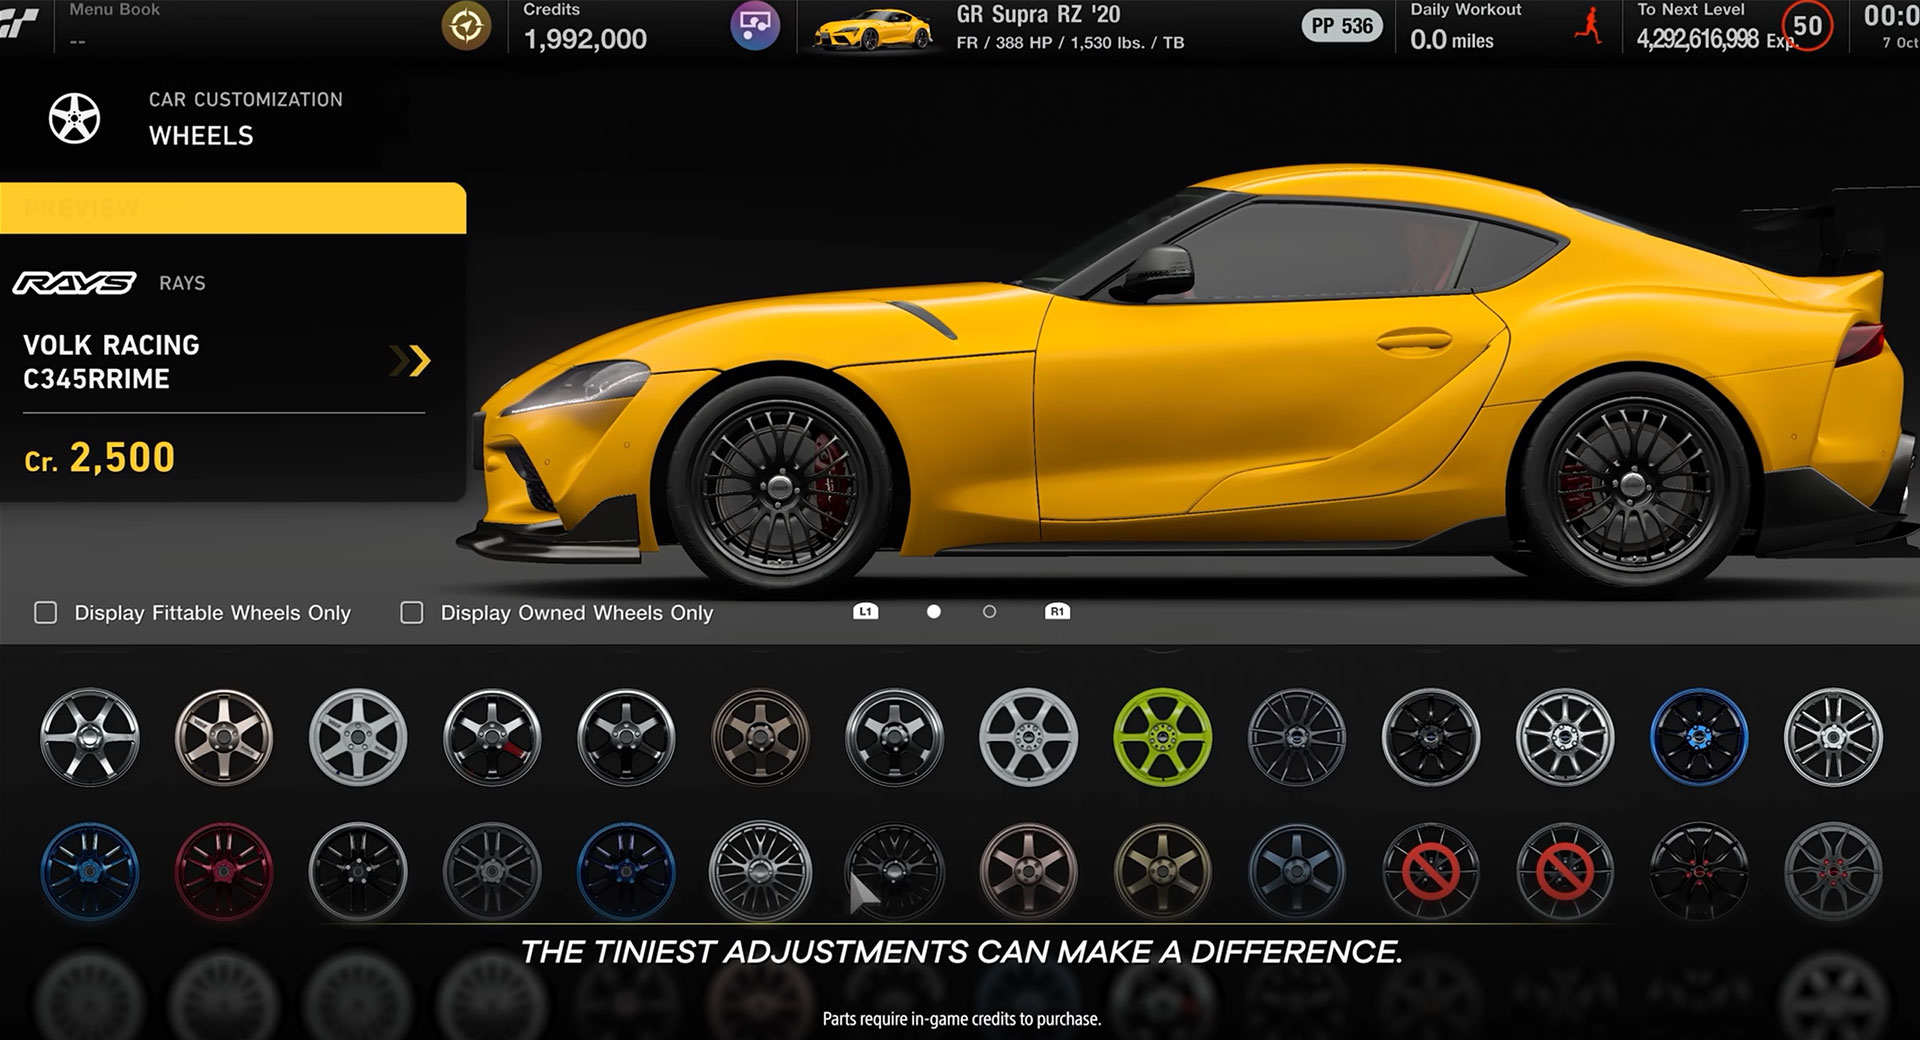 In the car customization screen of Gran Turismo 7, several hubcap styles are displayed beneath a sleek yellow race car. The bottom of the image reads "The tiniest adjustments can make a difference."